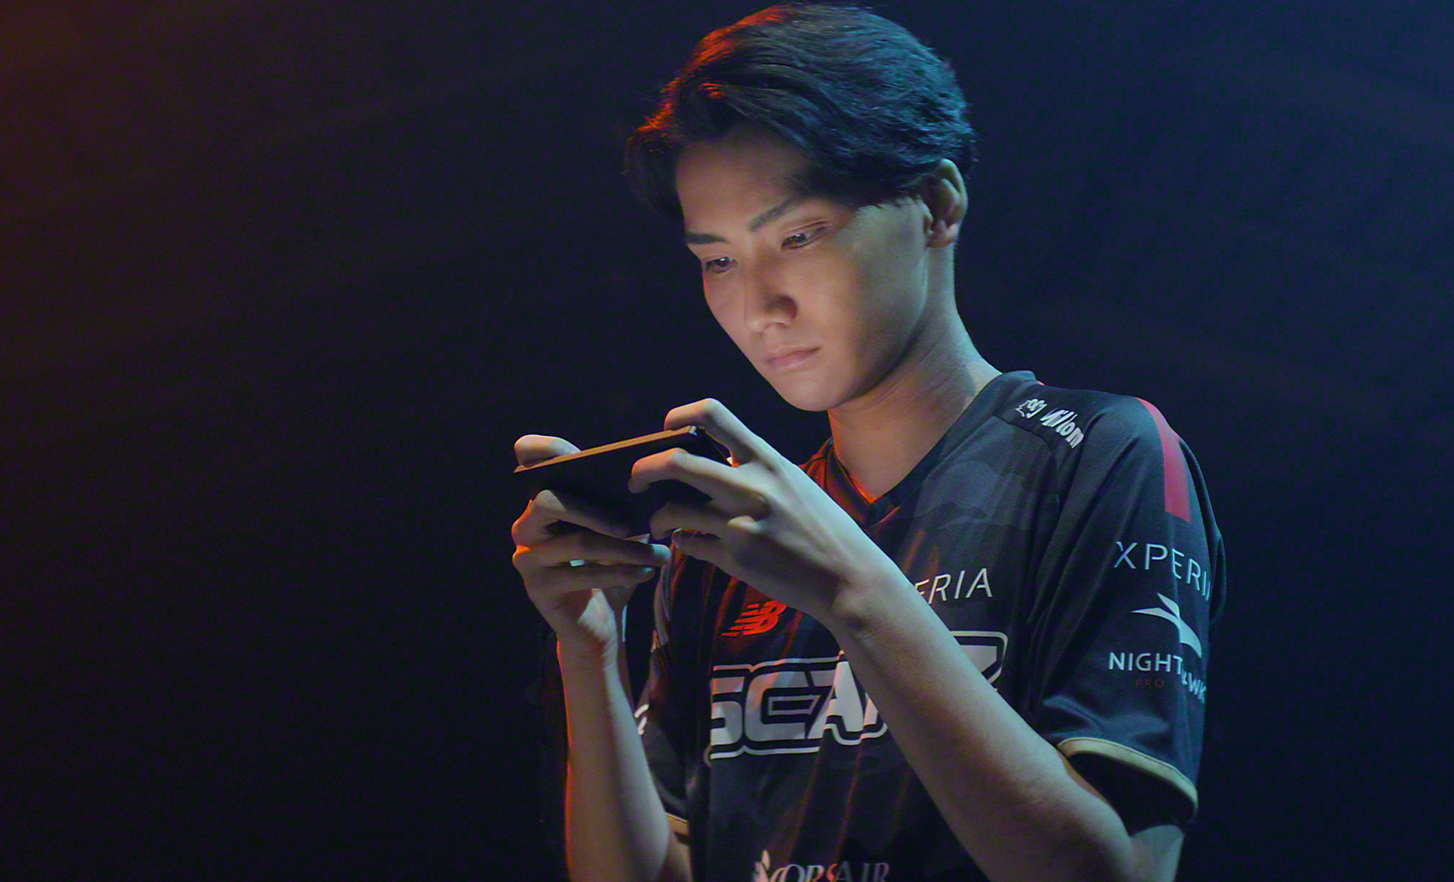 An eSports pro using the Xperia 1 IV for mobile gamingTBC